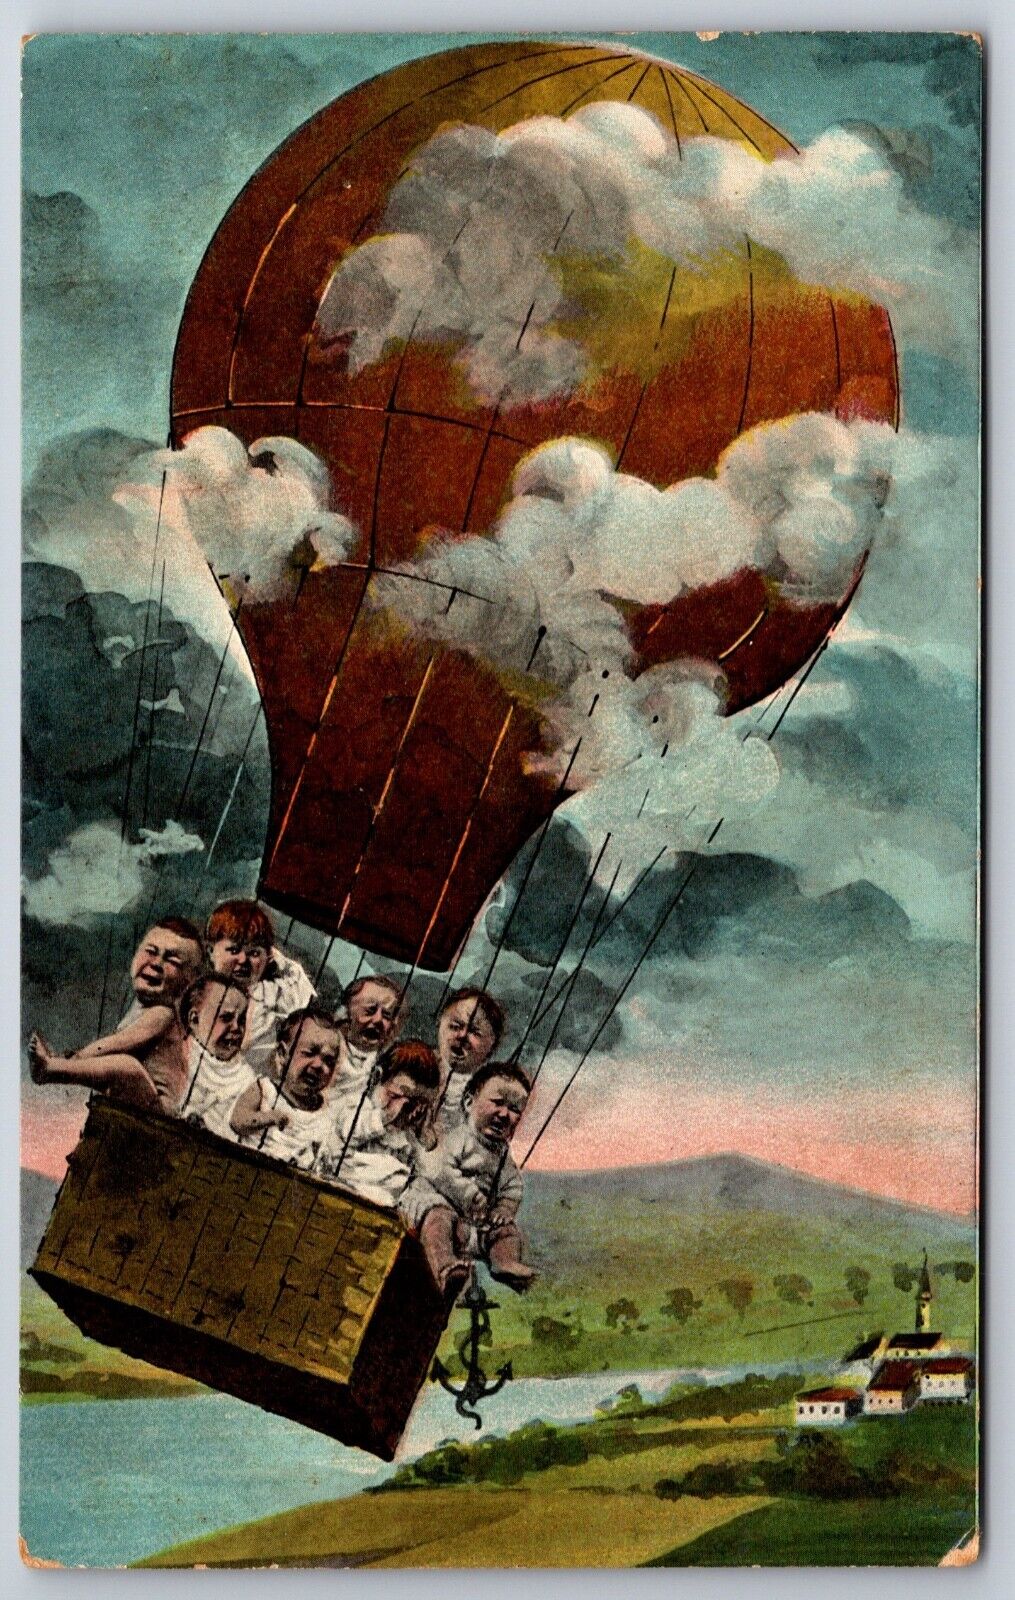 Fantasy~Multiple Babies Cry~Want Out Of Hot Air Balloon~Th EL Theochrom Ser 1049